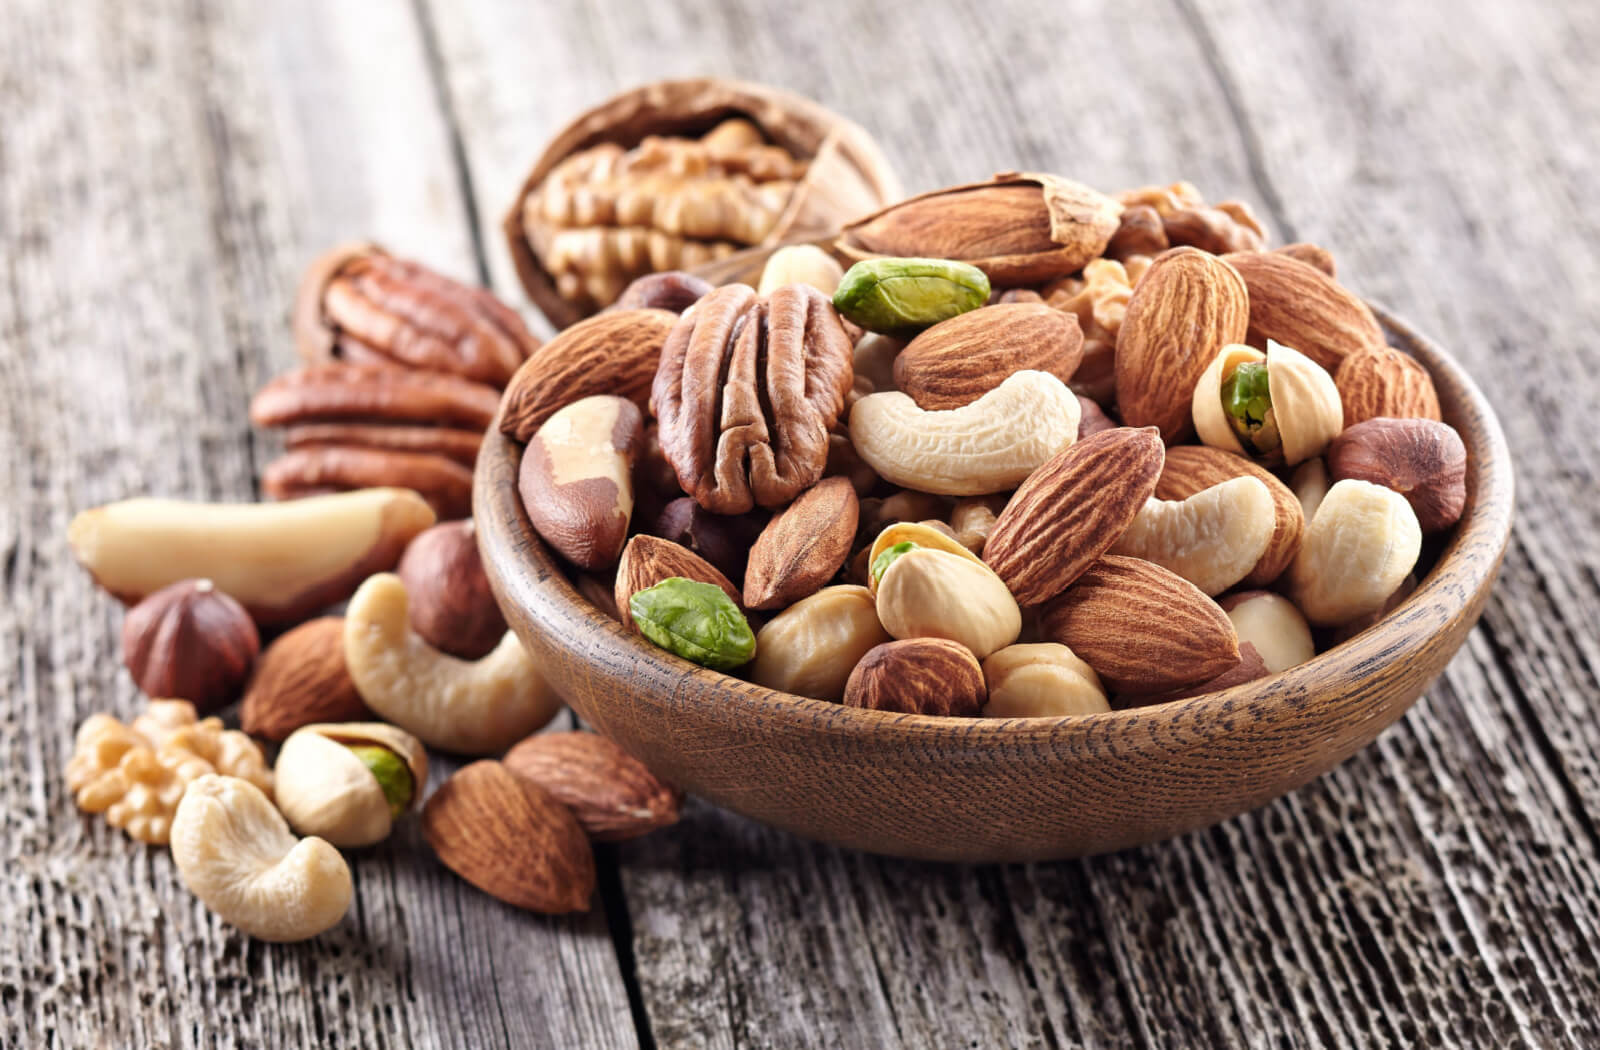 A wooden bowl full of assorted nuts.